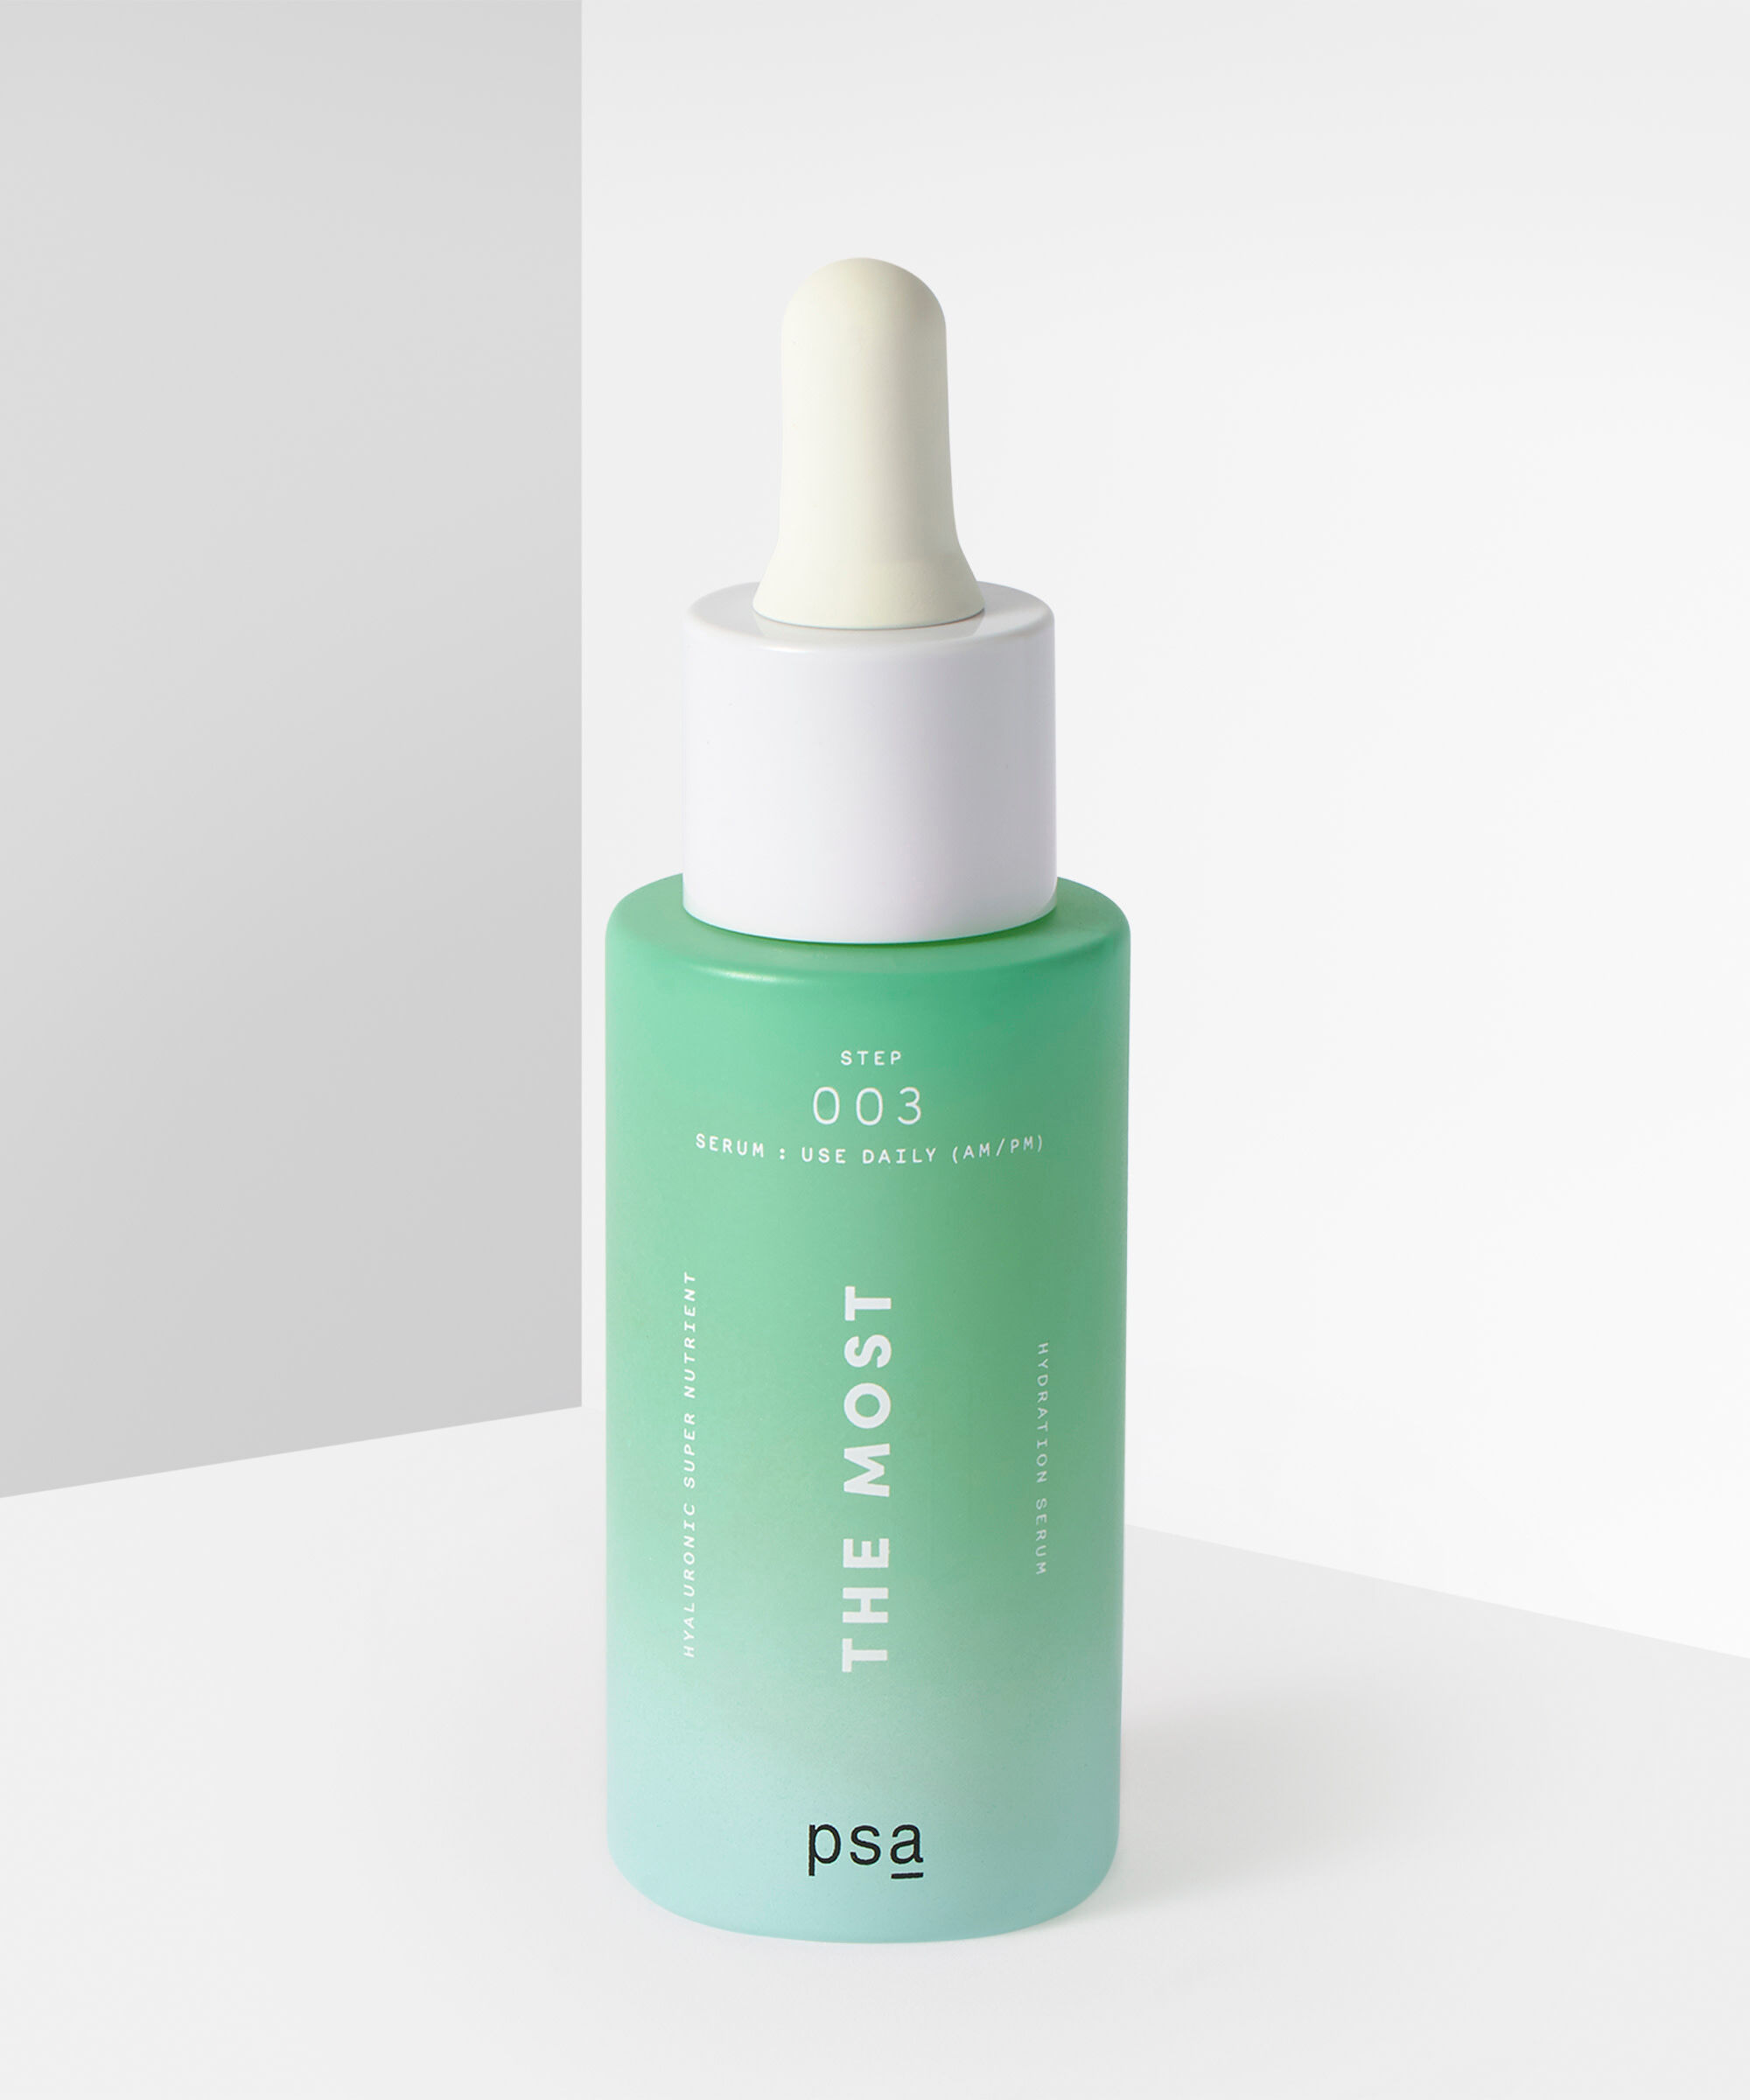 PSA Skin - The Most: Hyaluronic Super Nutrient Hydration Serum